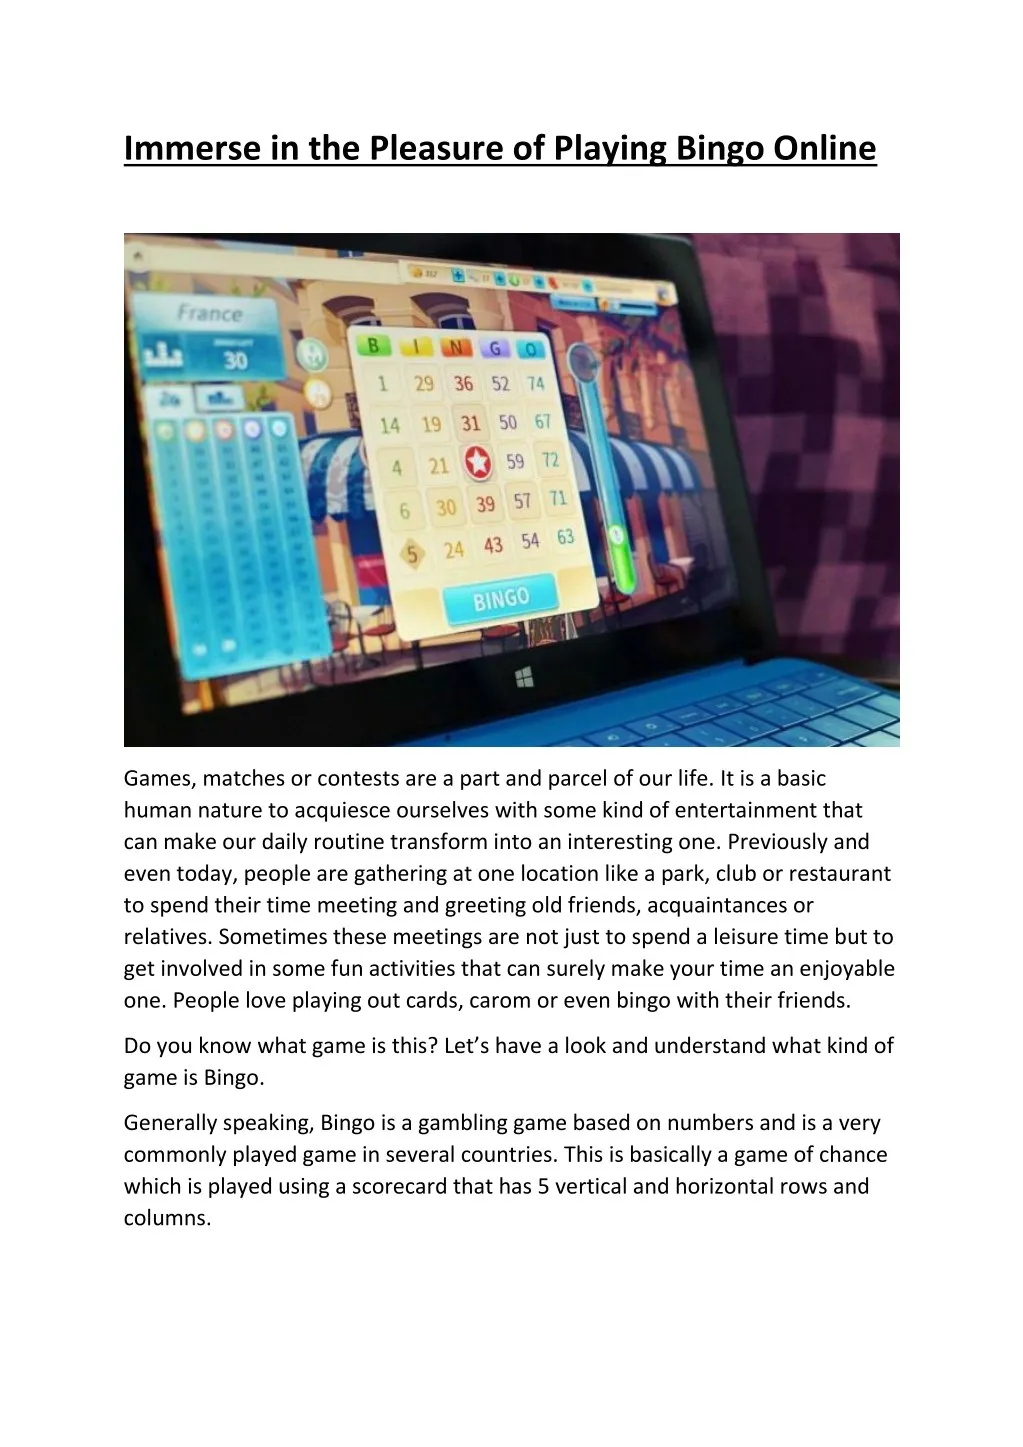 immerse in the pleasure of playing bingo online